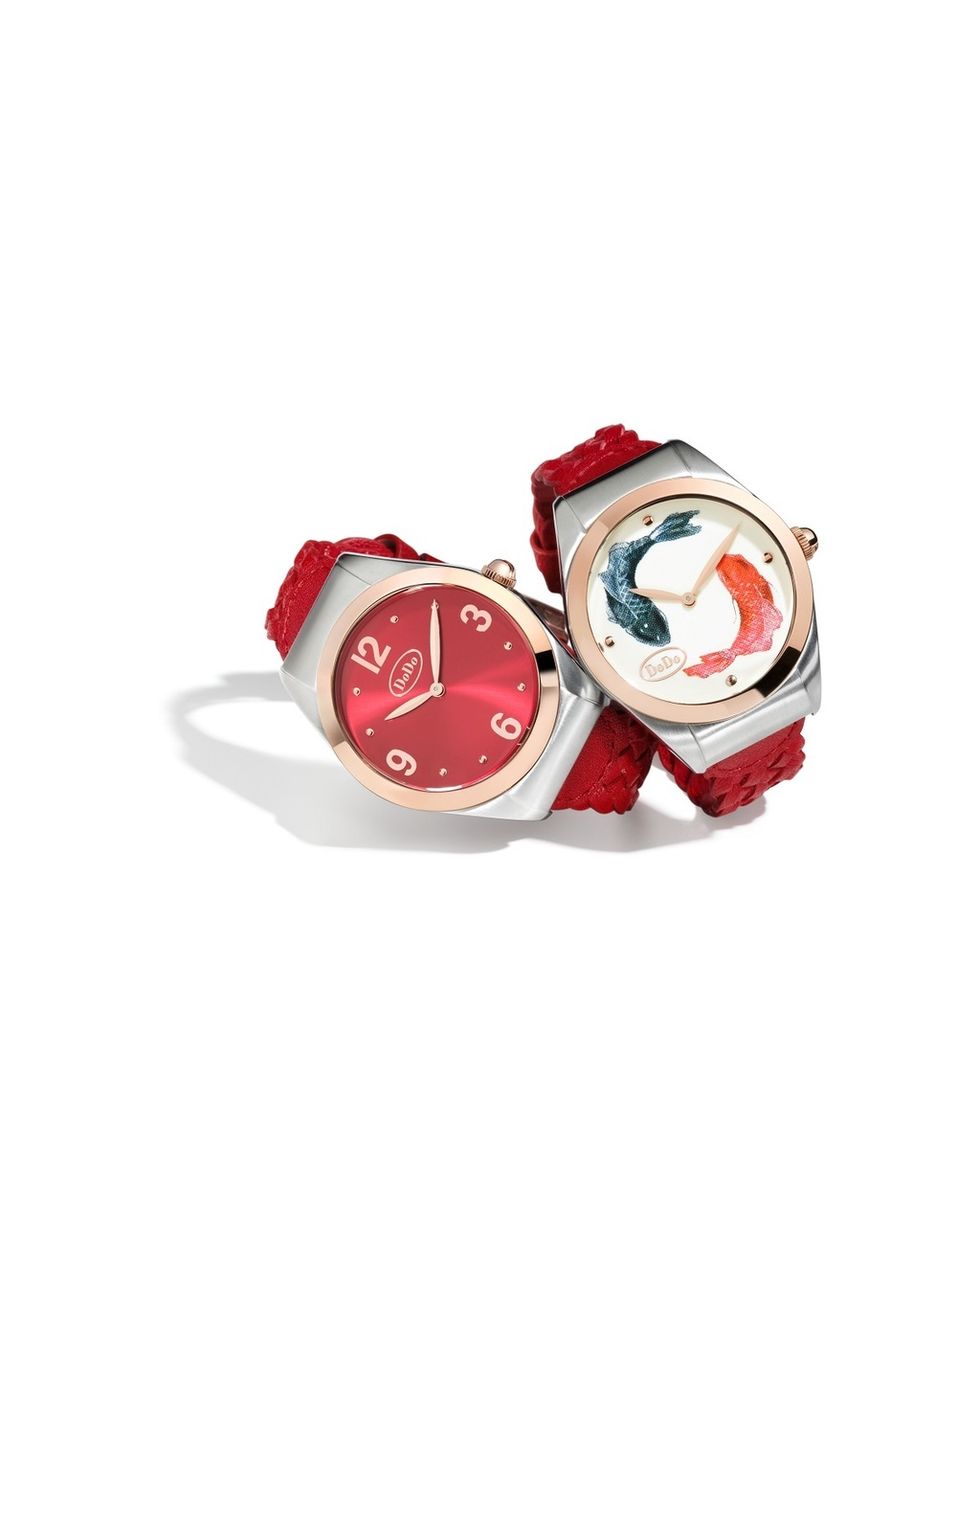 Brown, Product, Watch, Analog watch, Red, Watch accessory, Fashion accessory, Carmine, Maroon, Beige, 